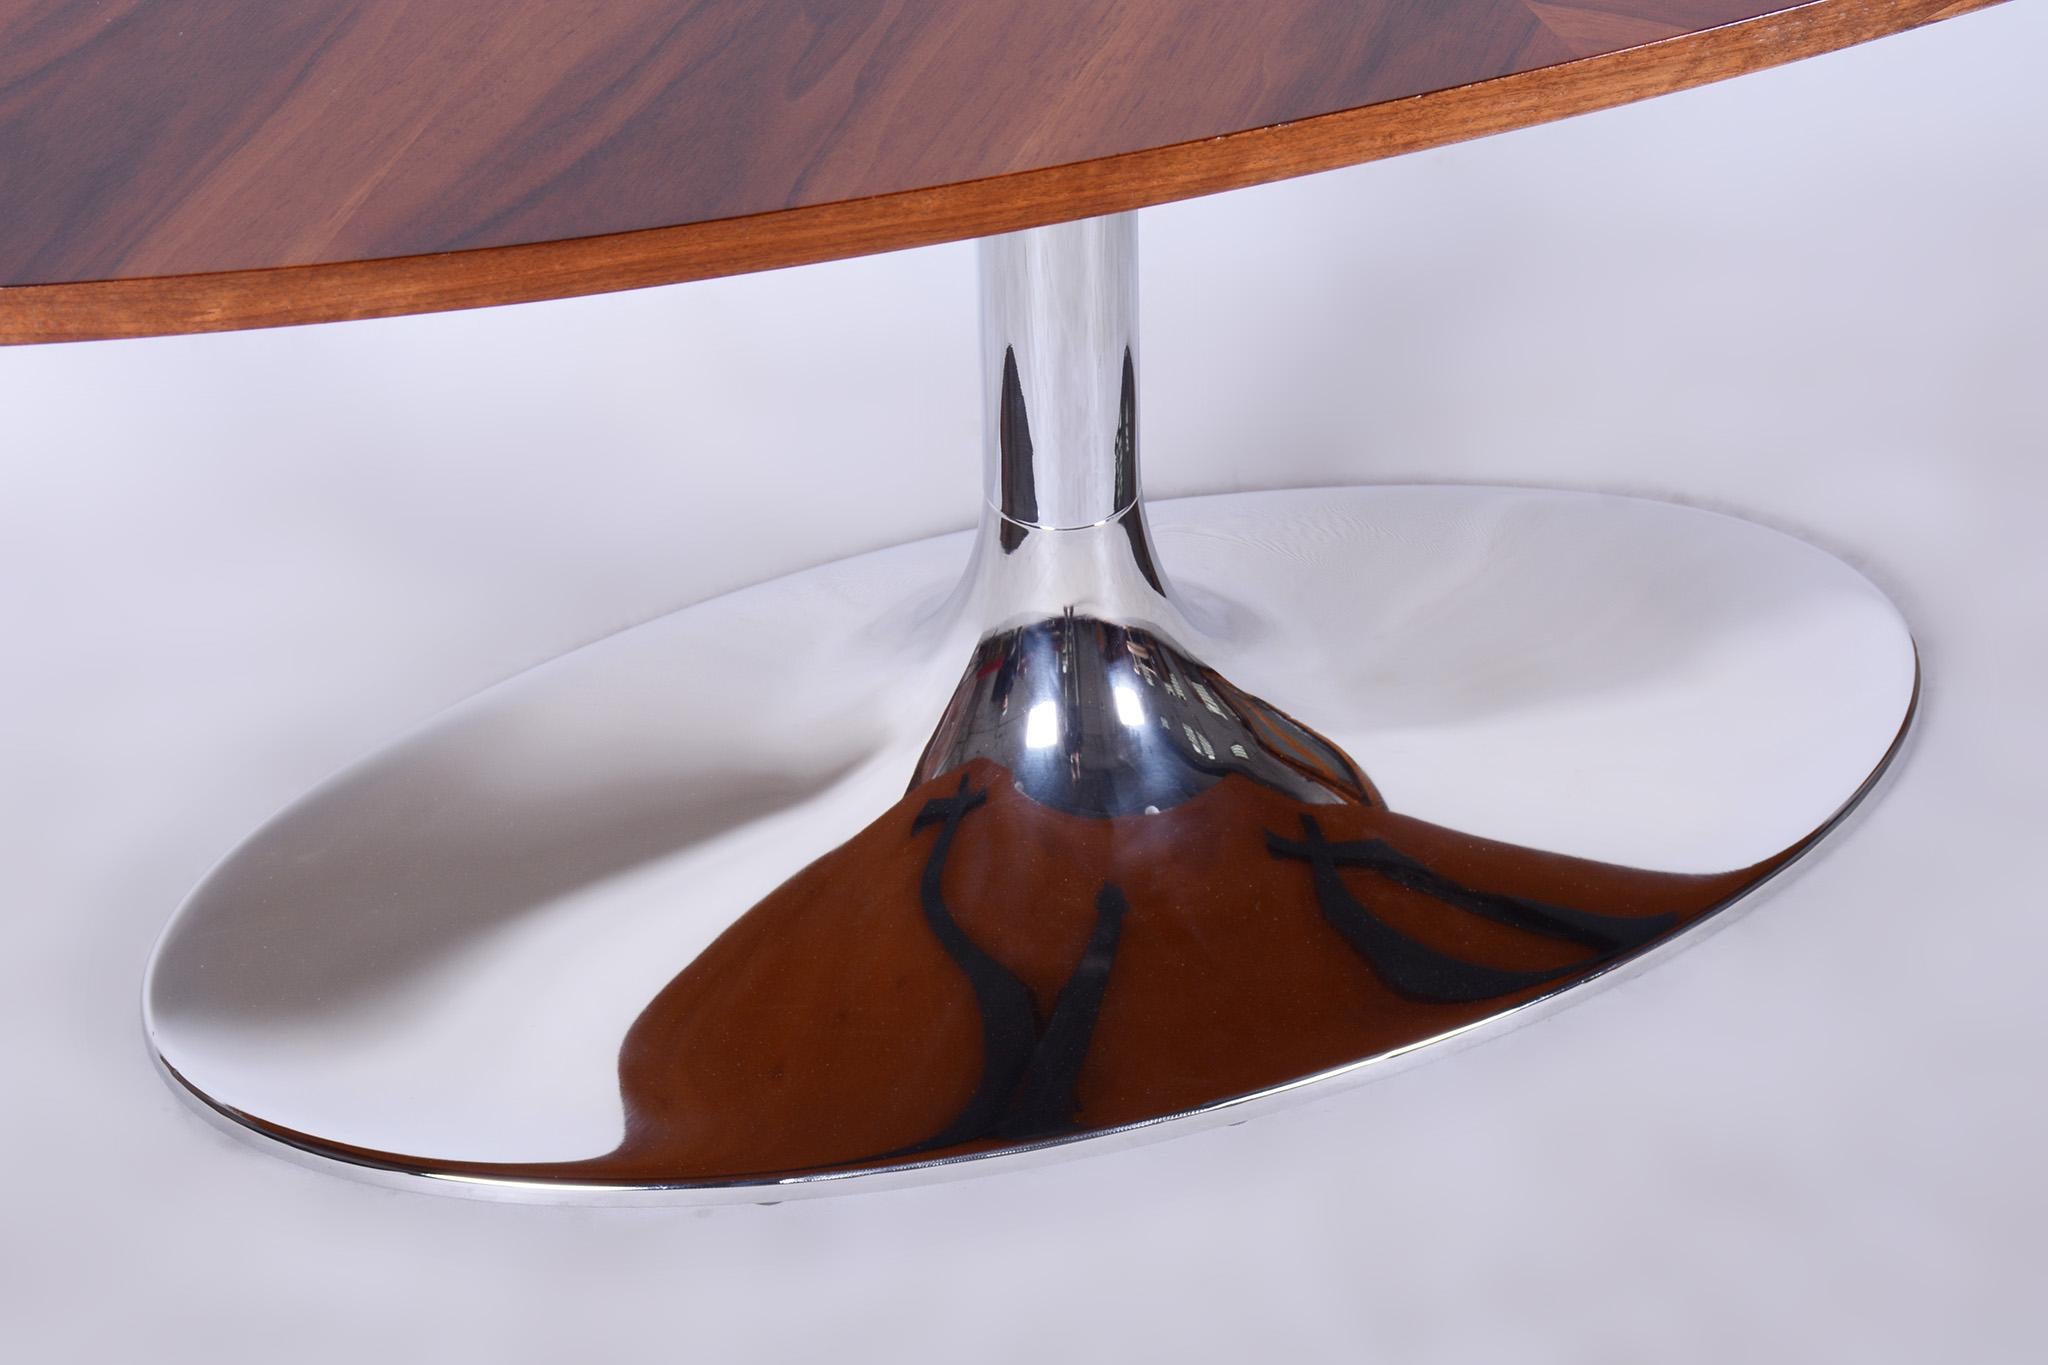 Restored Oval Table, Functionalism. Made by Kovona.

Source: Czechia (Czechoslovakia)
Maker: Kovona
Period: 1960-1969
Material: Walnut, Chrome-Plated Steel

Made by Kovona, a renowned Czech manufacturer and dealer from the 20th